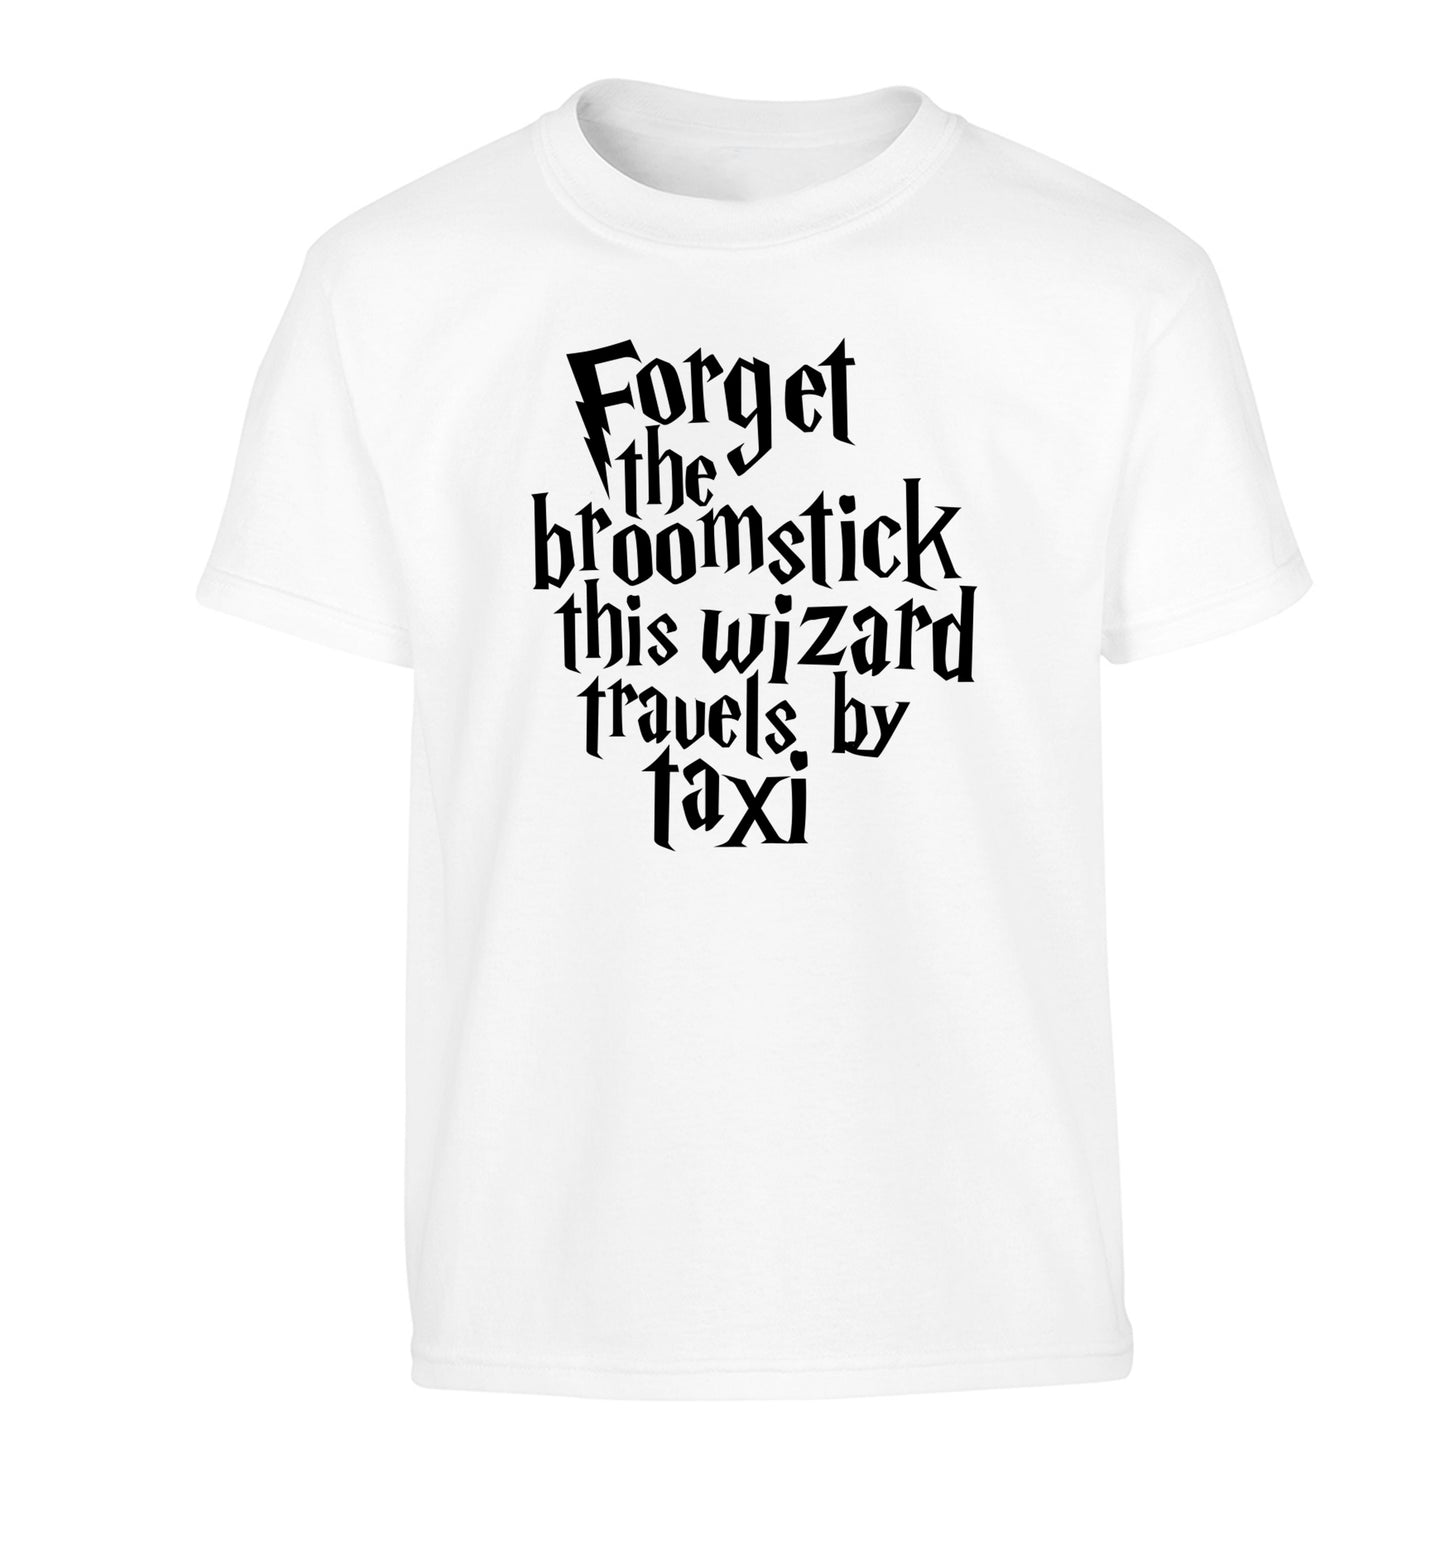 Forget the broomstick this wizard travels by taxi Children's white Tshirt 12-14 Years